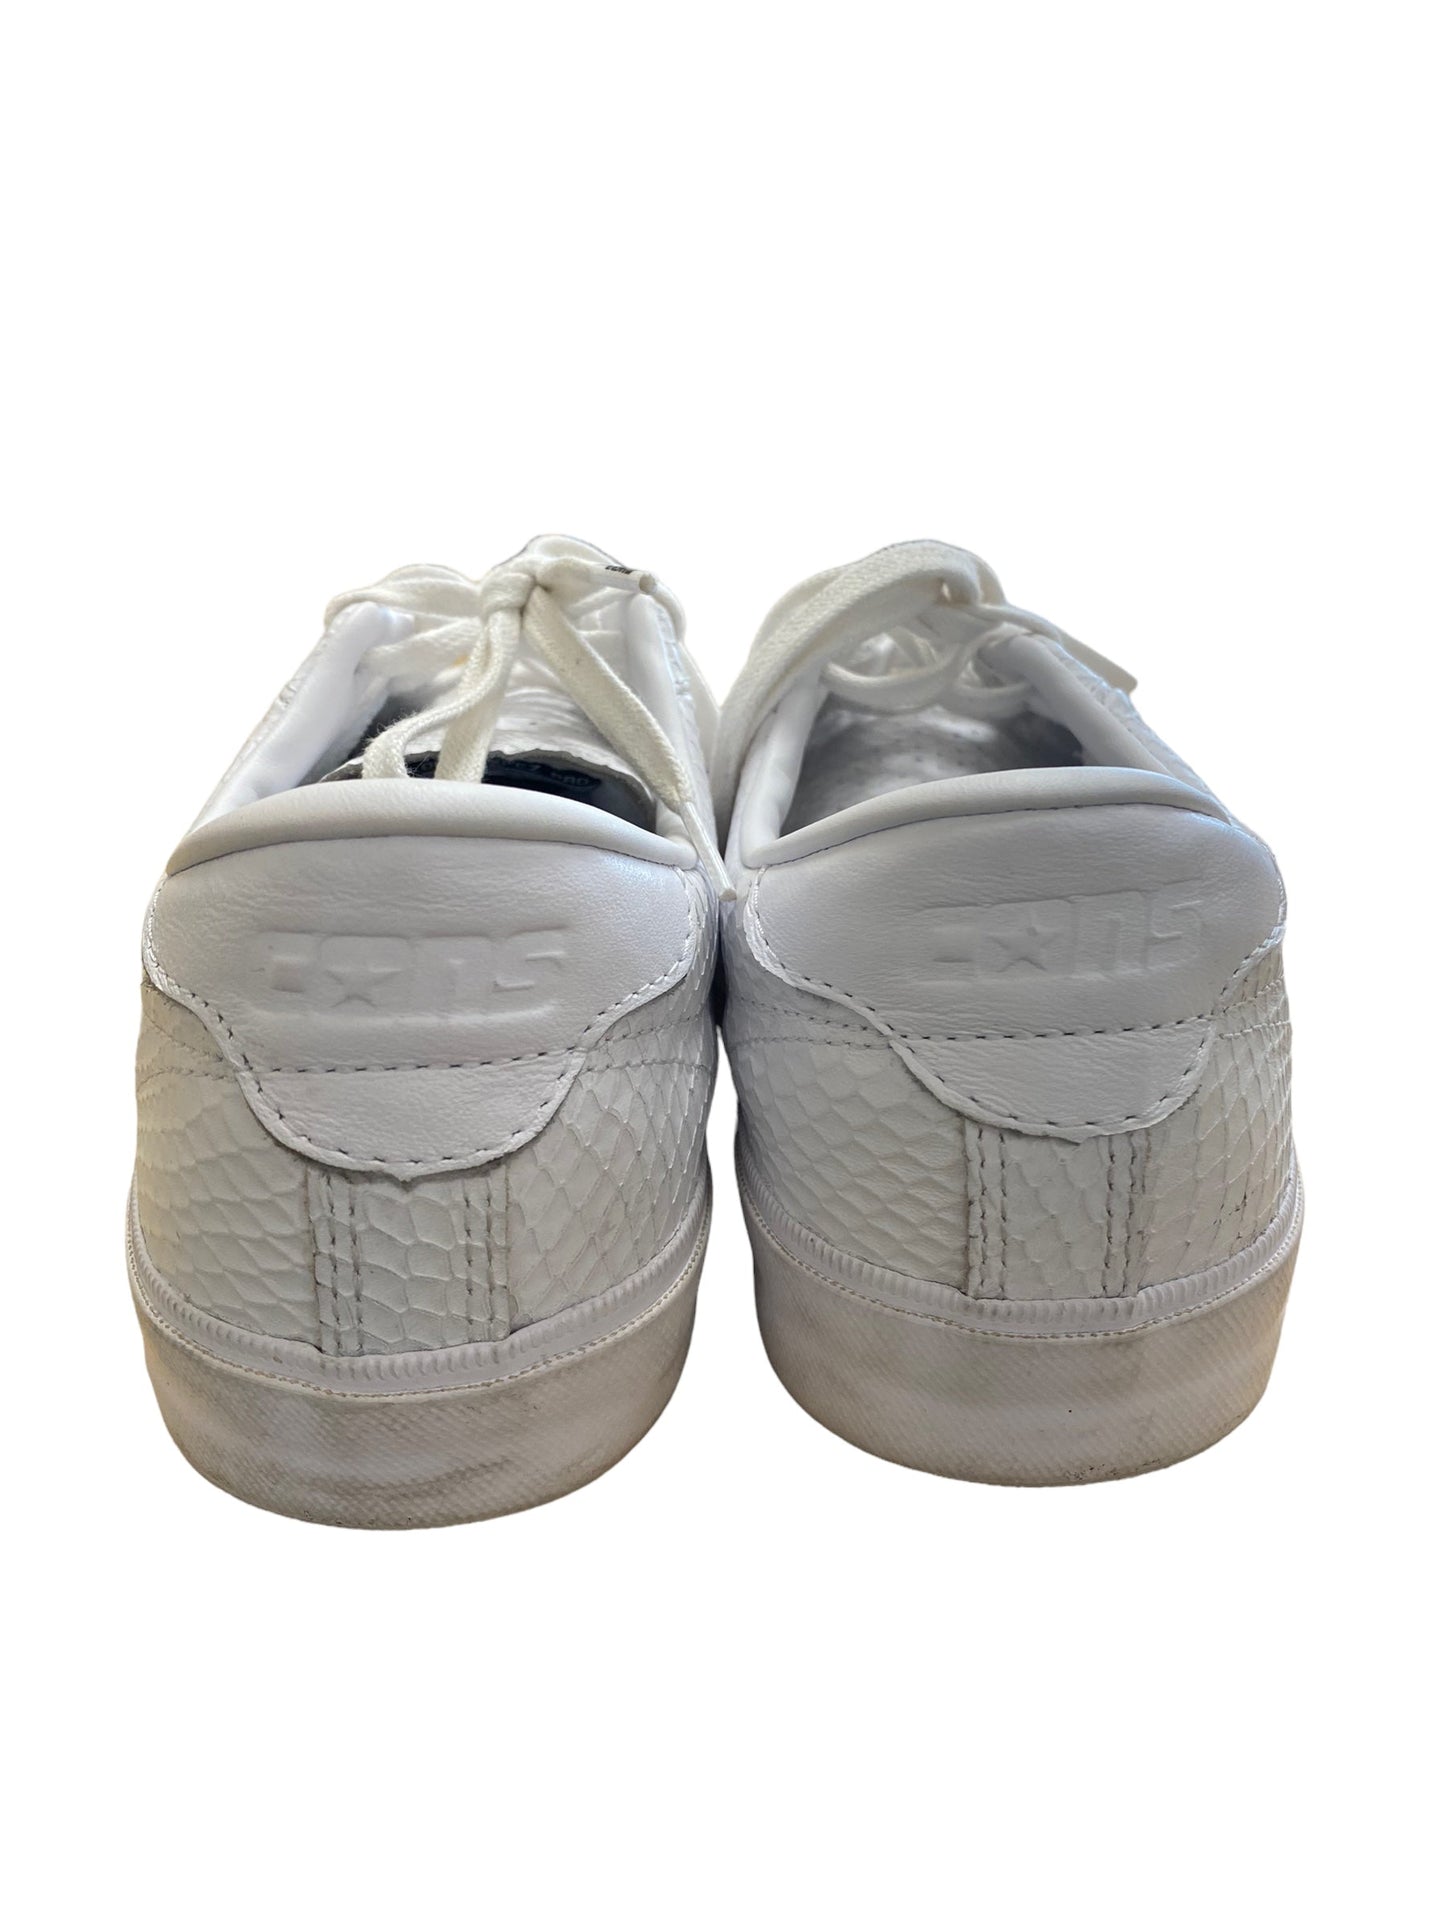 Shoes Athletic By Converse  Size: 12